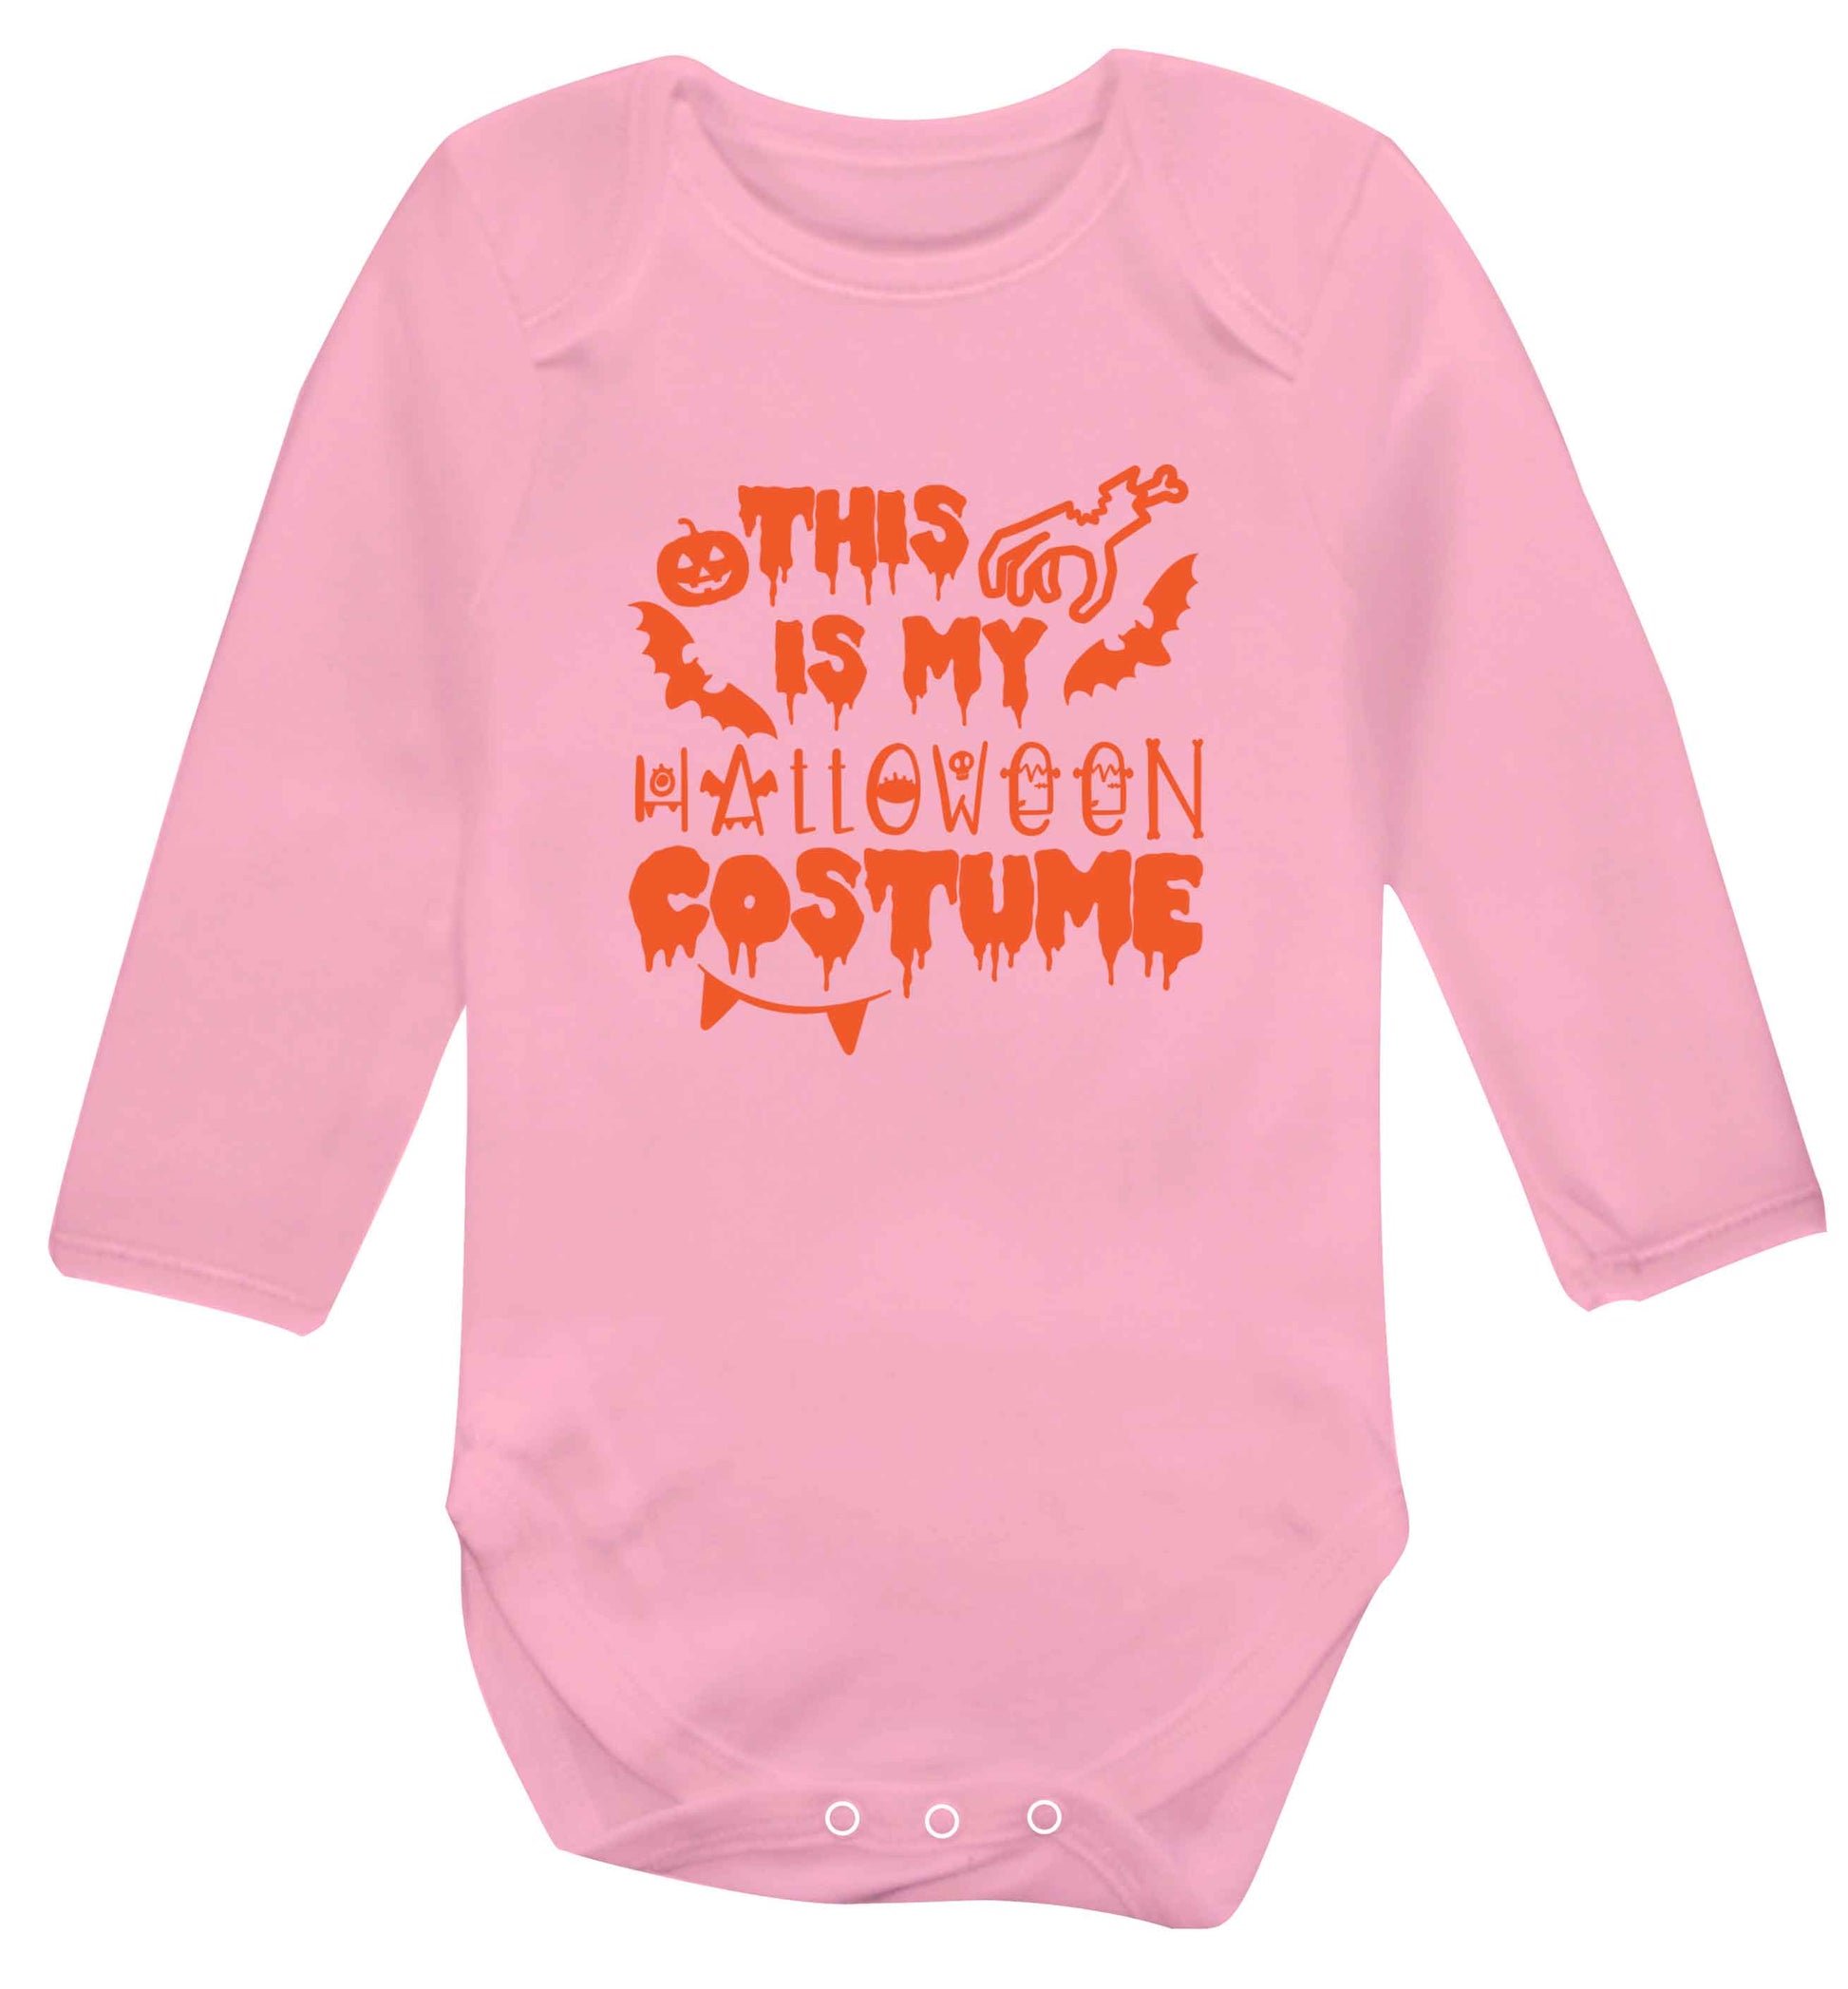 This is my halloween costume baby vest long sleeved pale pink 6-12 months